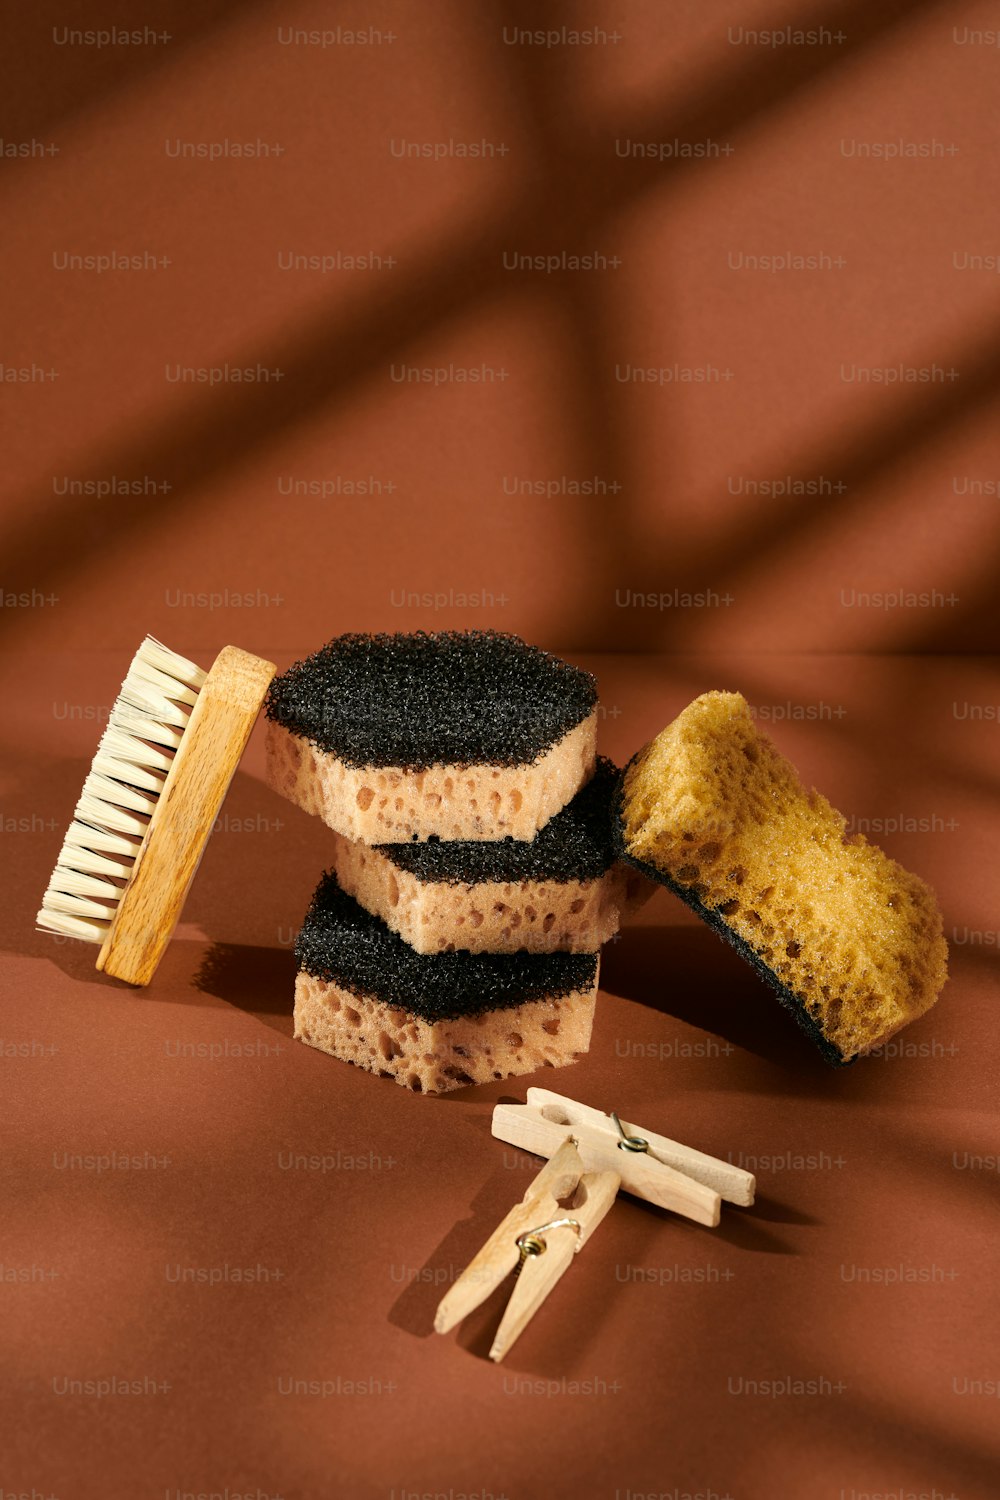 a comb, sponge, and other items on a brown surface